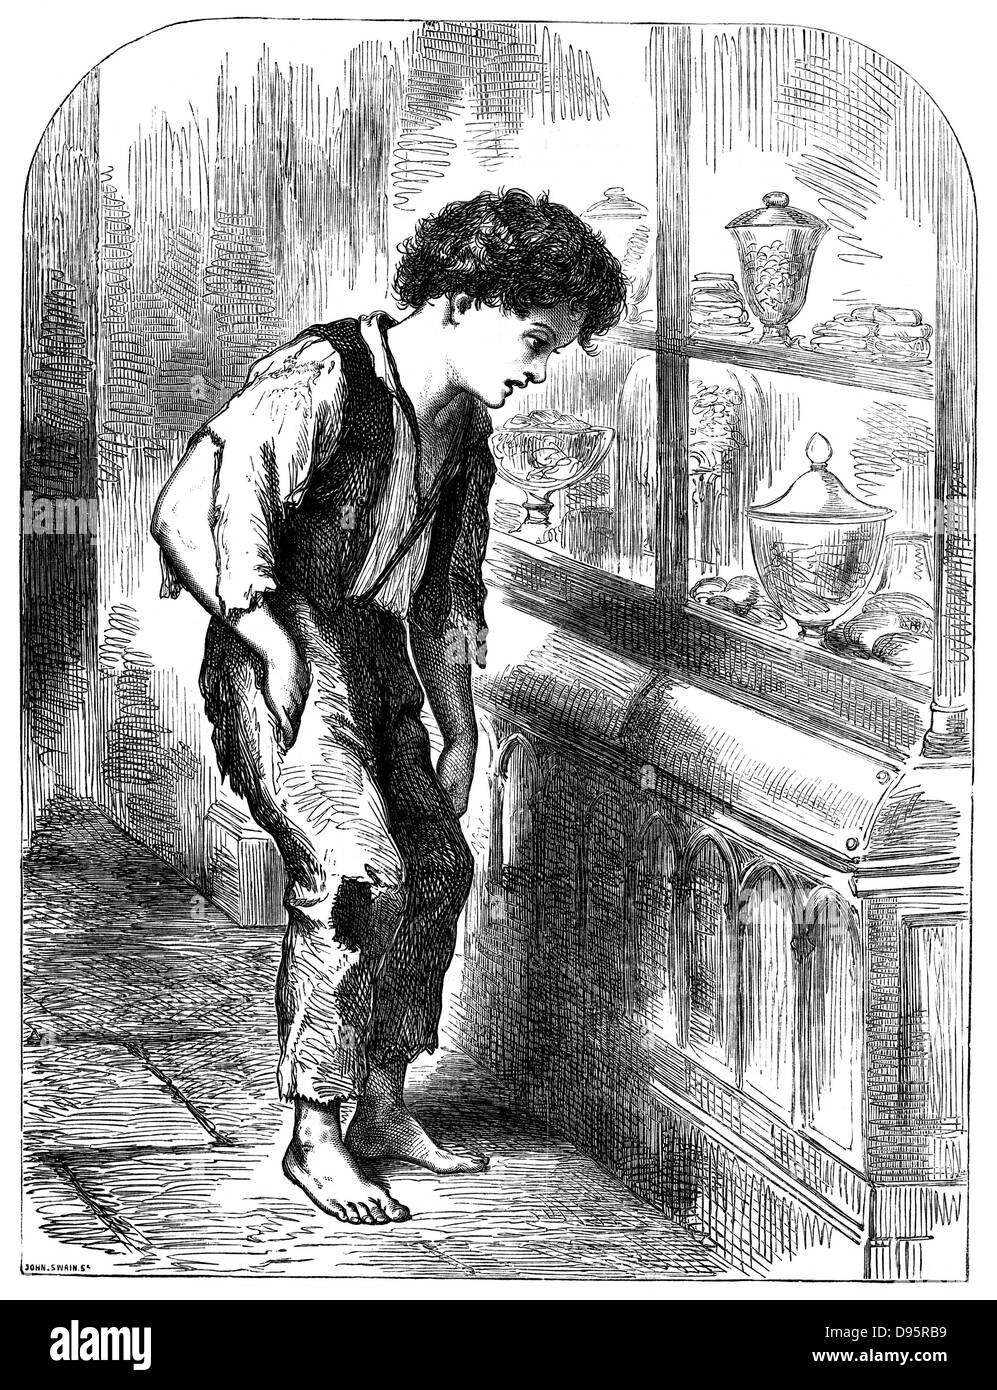 London Street Arab, shoeless and in rags, looking longingly at the sweets in a confectioner's window.  From 'Le Voleur' Paris 1883. Wood engraving. Stock Photo